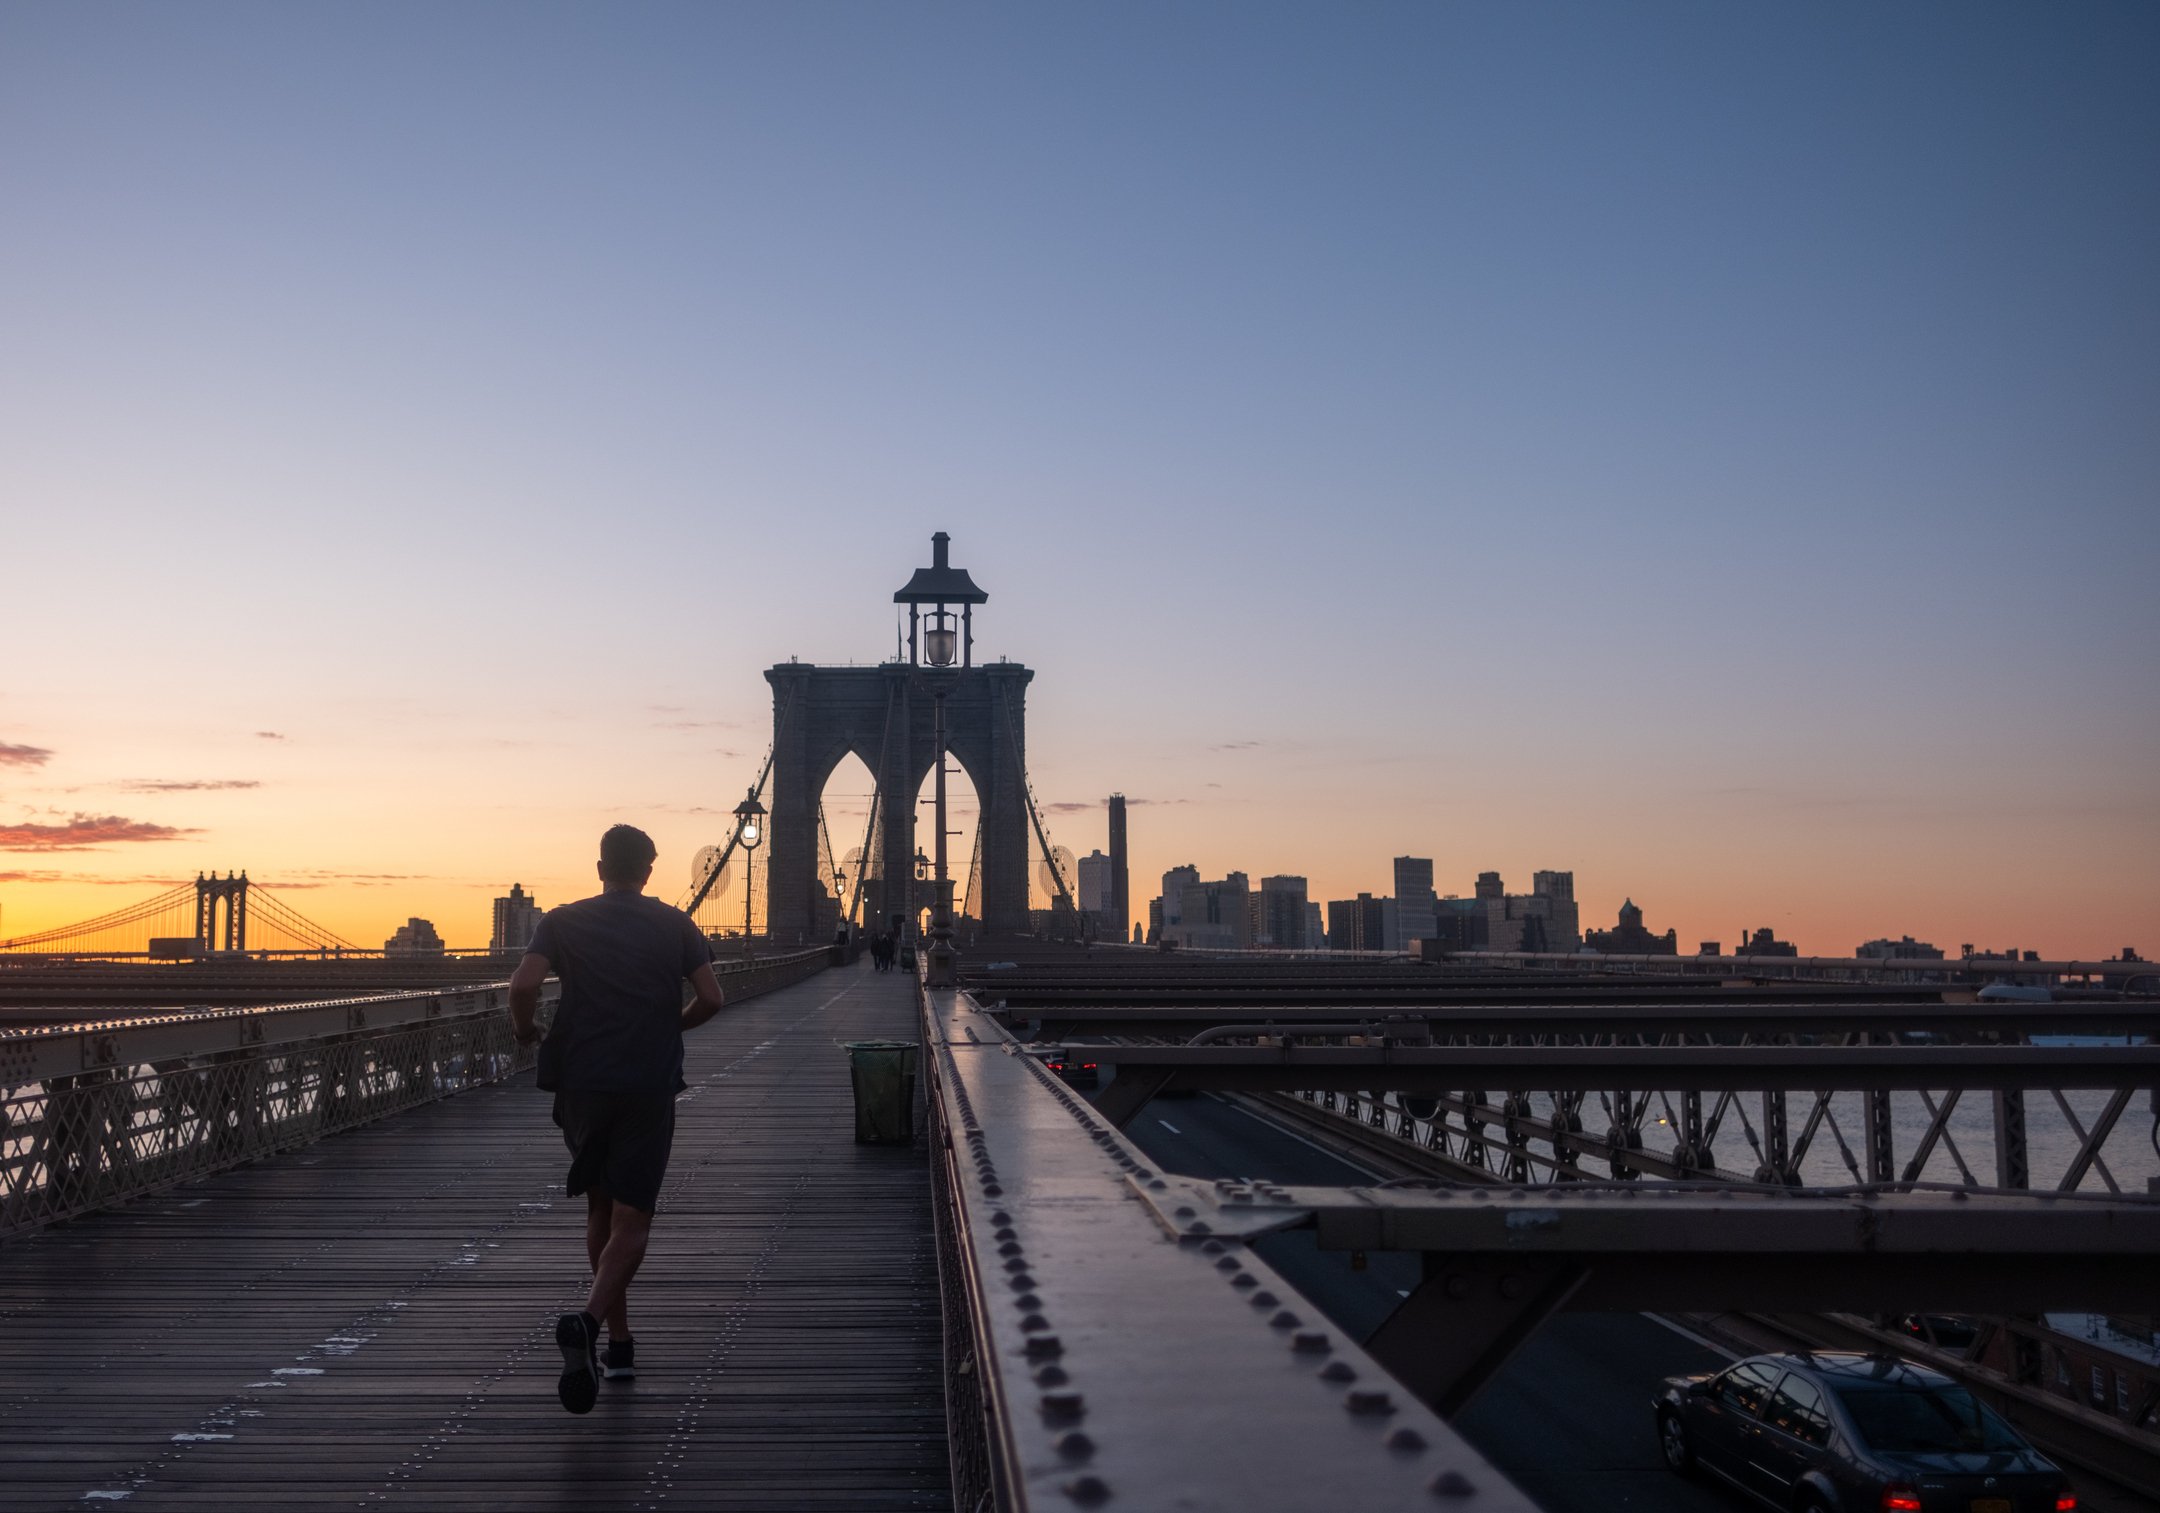 A single runner heads towards Brooklyn on the bridge, sky is orange and a few of the walkway's lights are visible